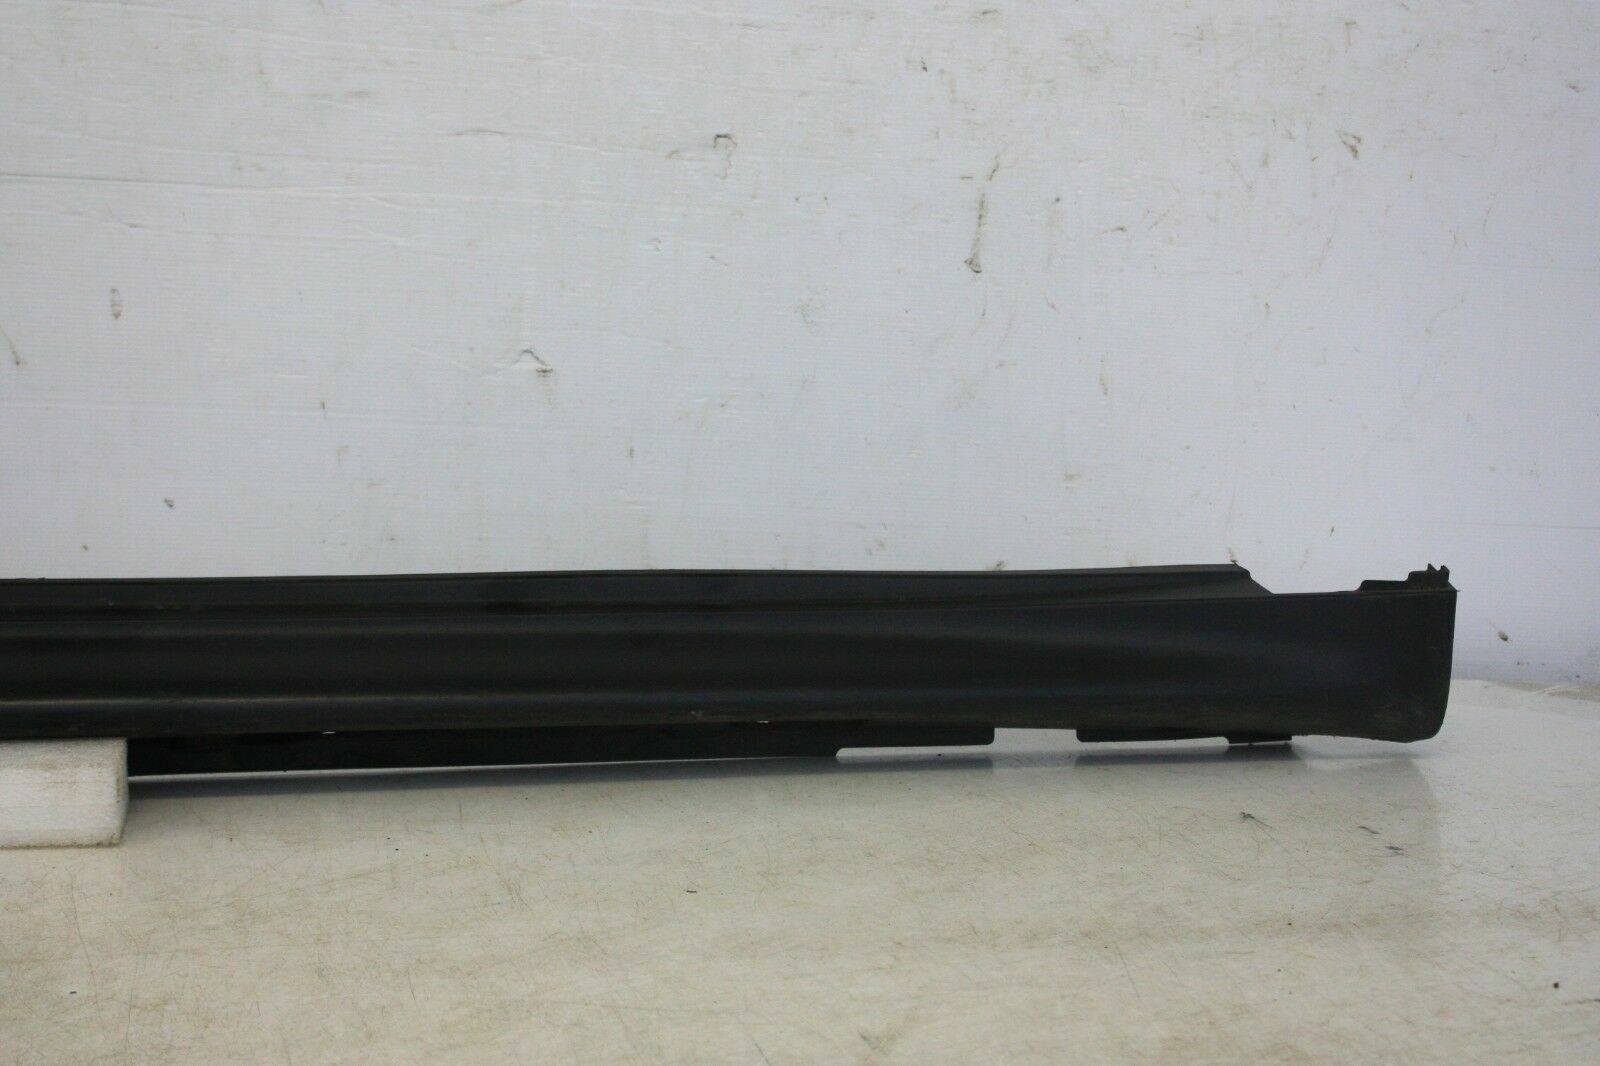 NISSAN-JUKE-RIGHT-SIDE-SKIRT-SILL-COVER-2010-TO-2014-175367545063-2